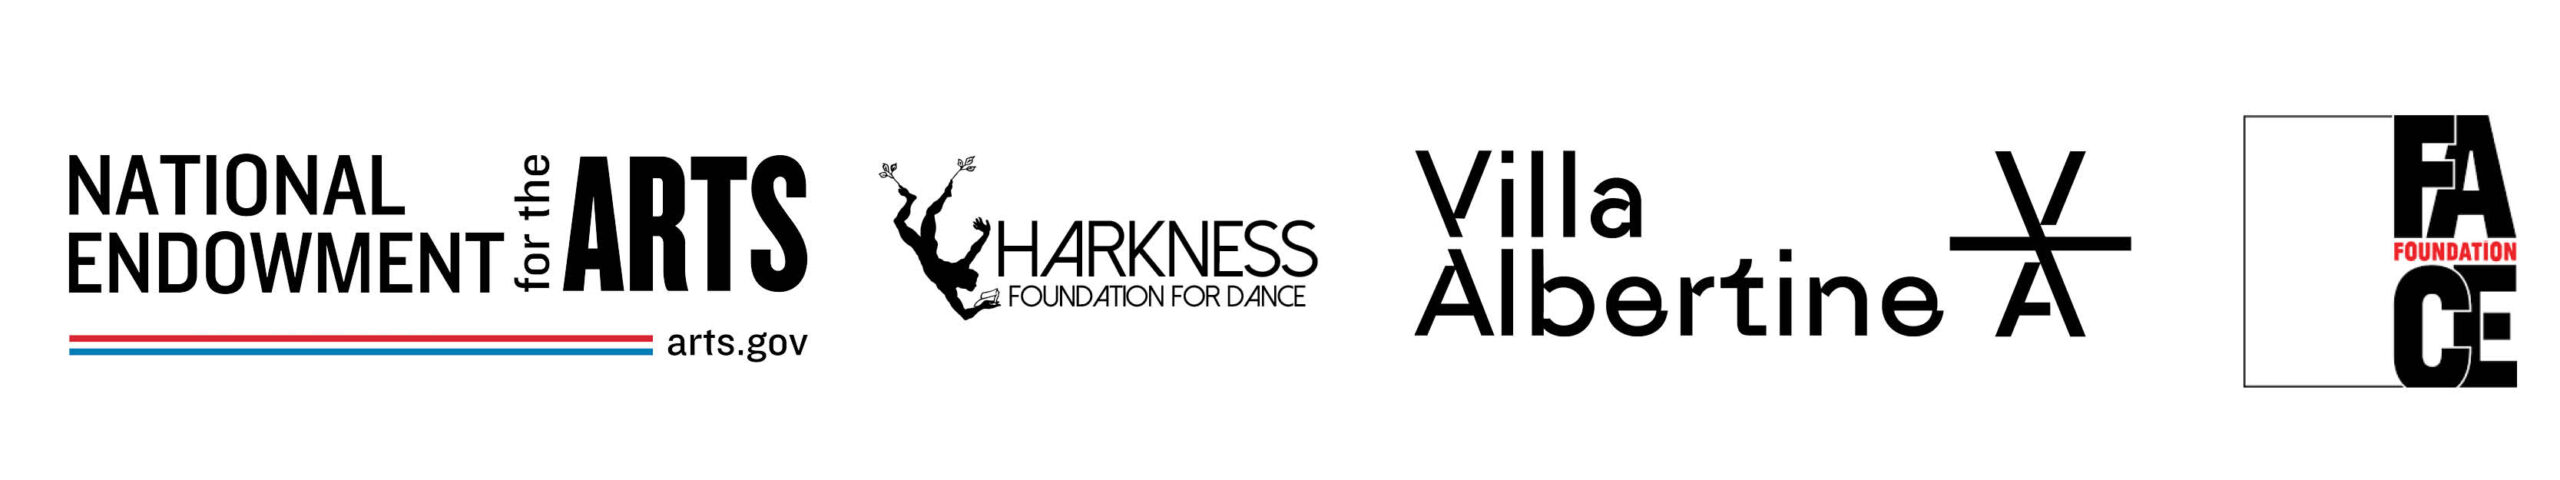 Logos: National Endowment for the Arts; Harkness Foundation for Dance; Villa Albertine; Face Foundation 